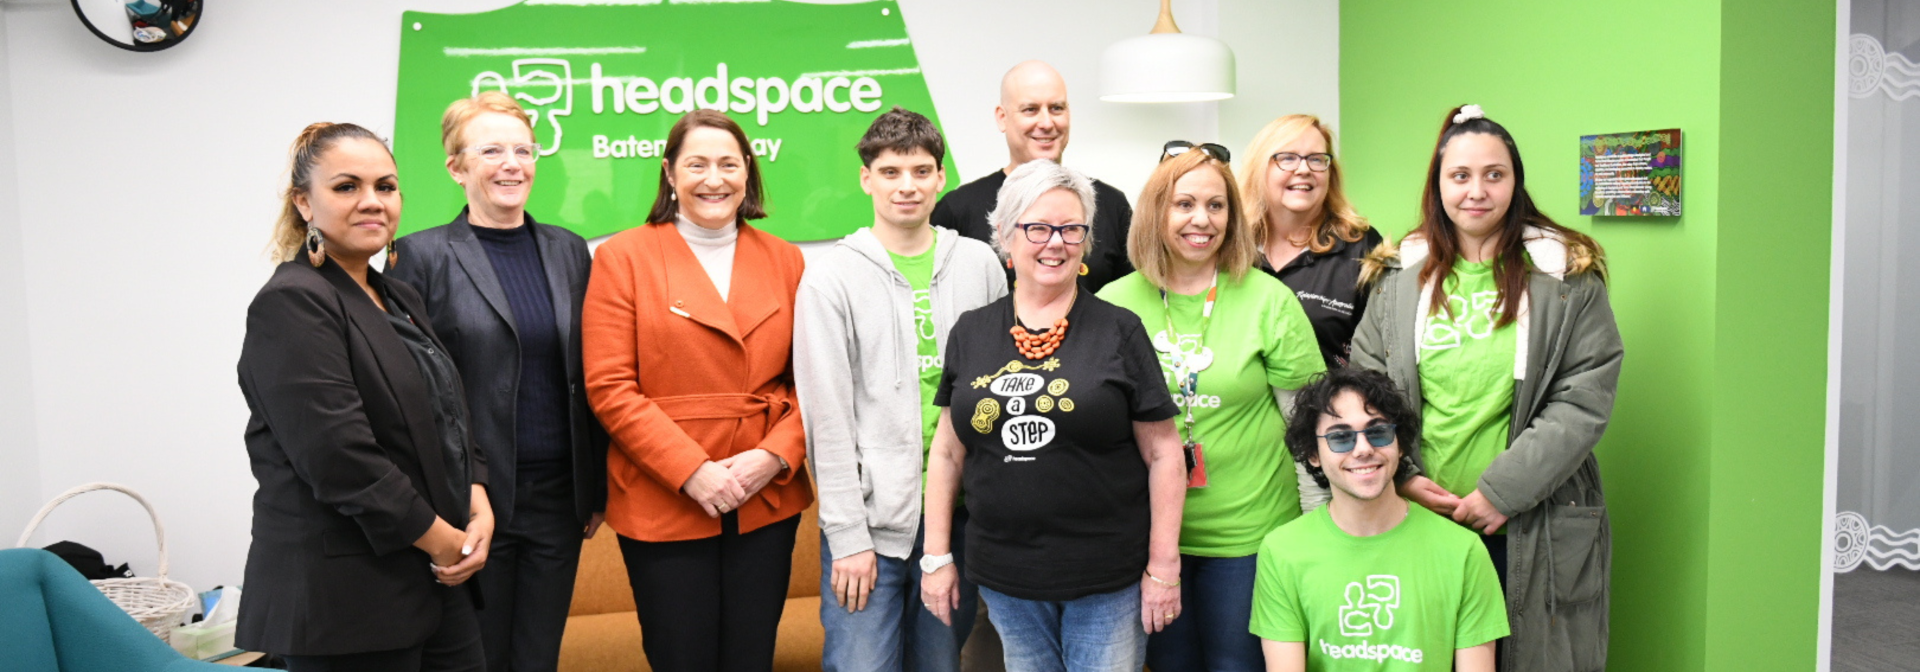 Katungul’s CEO Kalene Brown, COORDINARE’s CEO Dianne Kitcher, Member for Gilmore Fiona Phillips and headspace Batemans Bay staff.